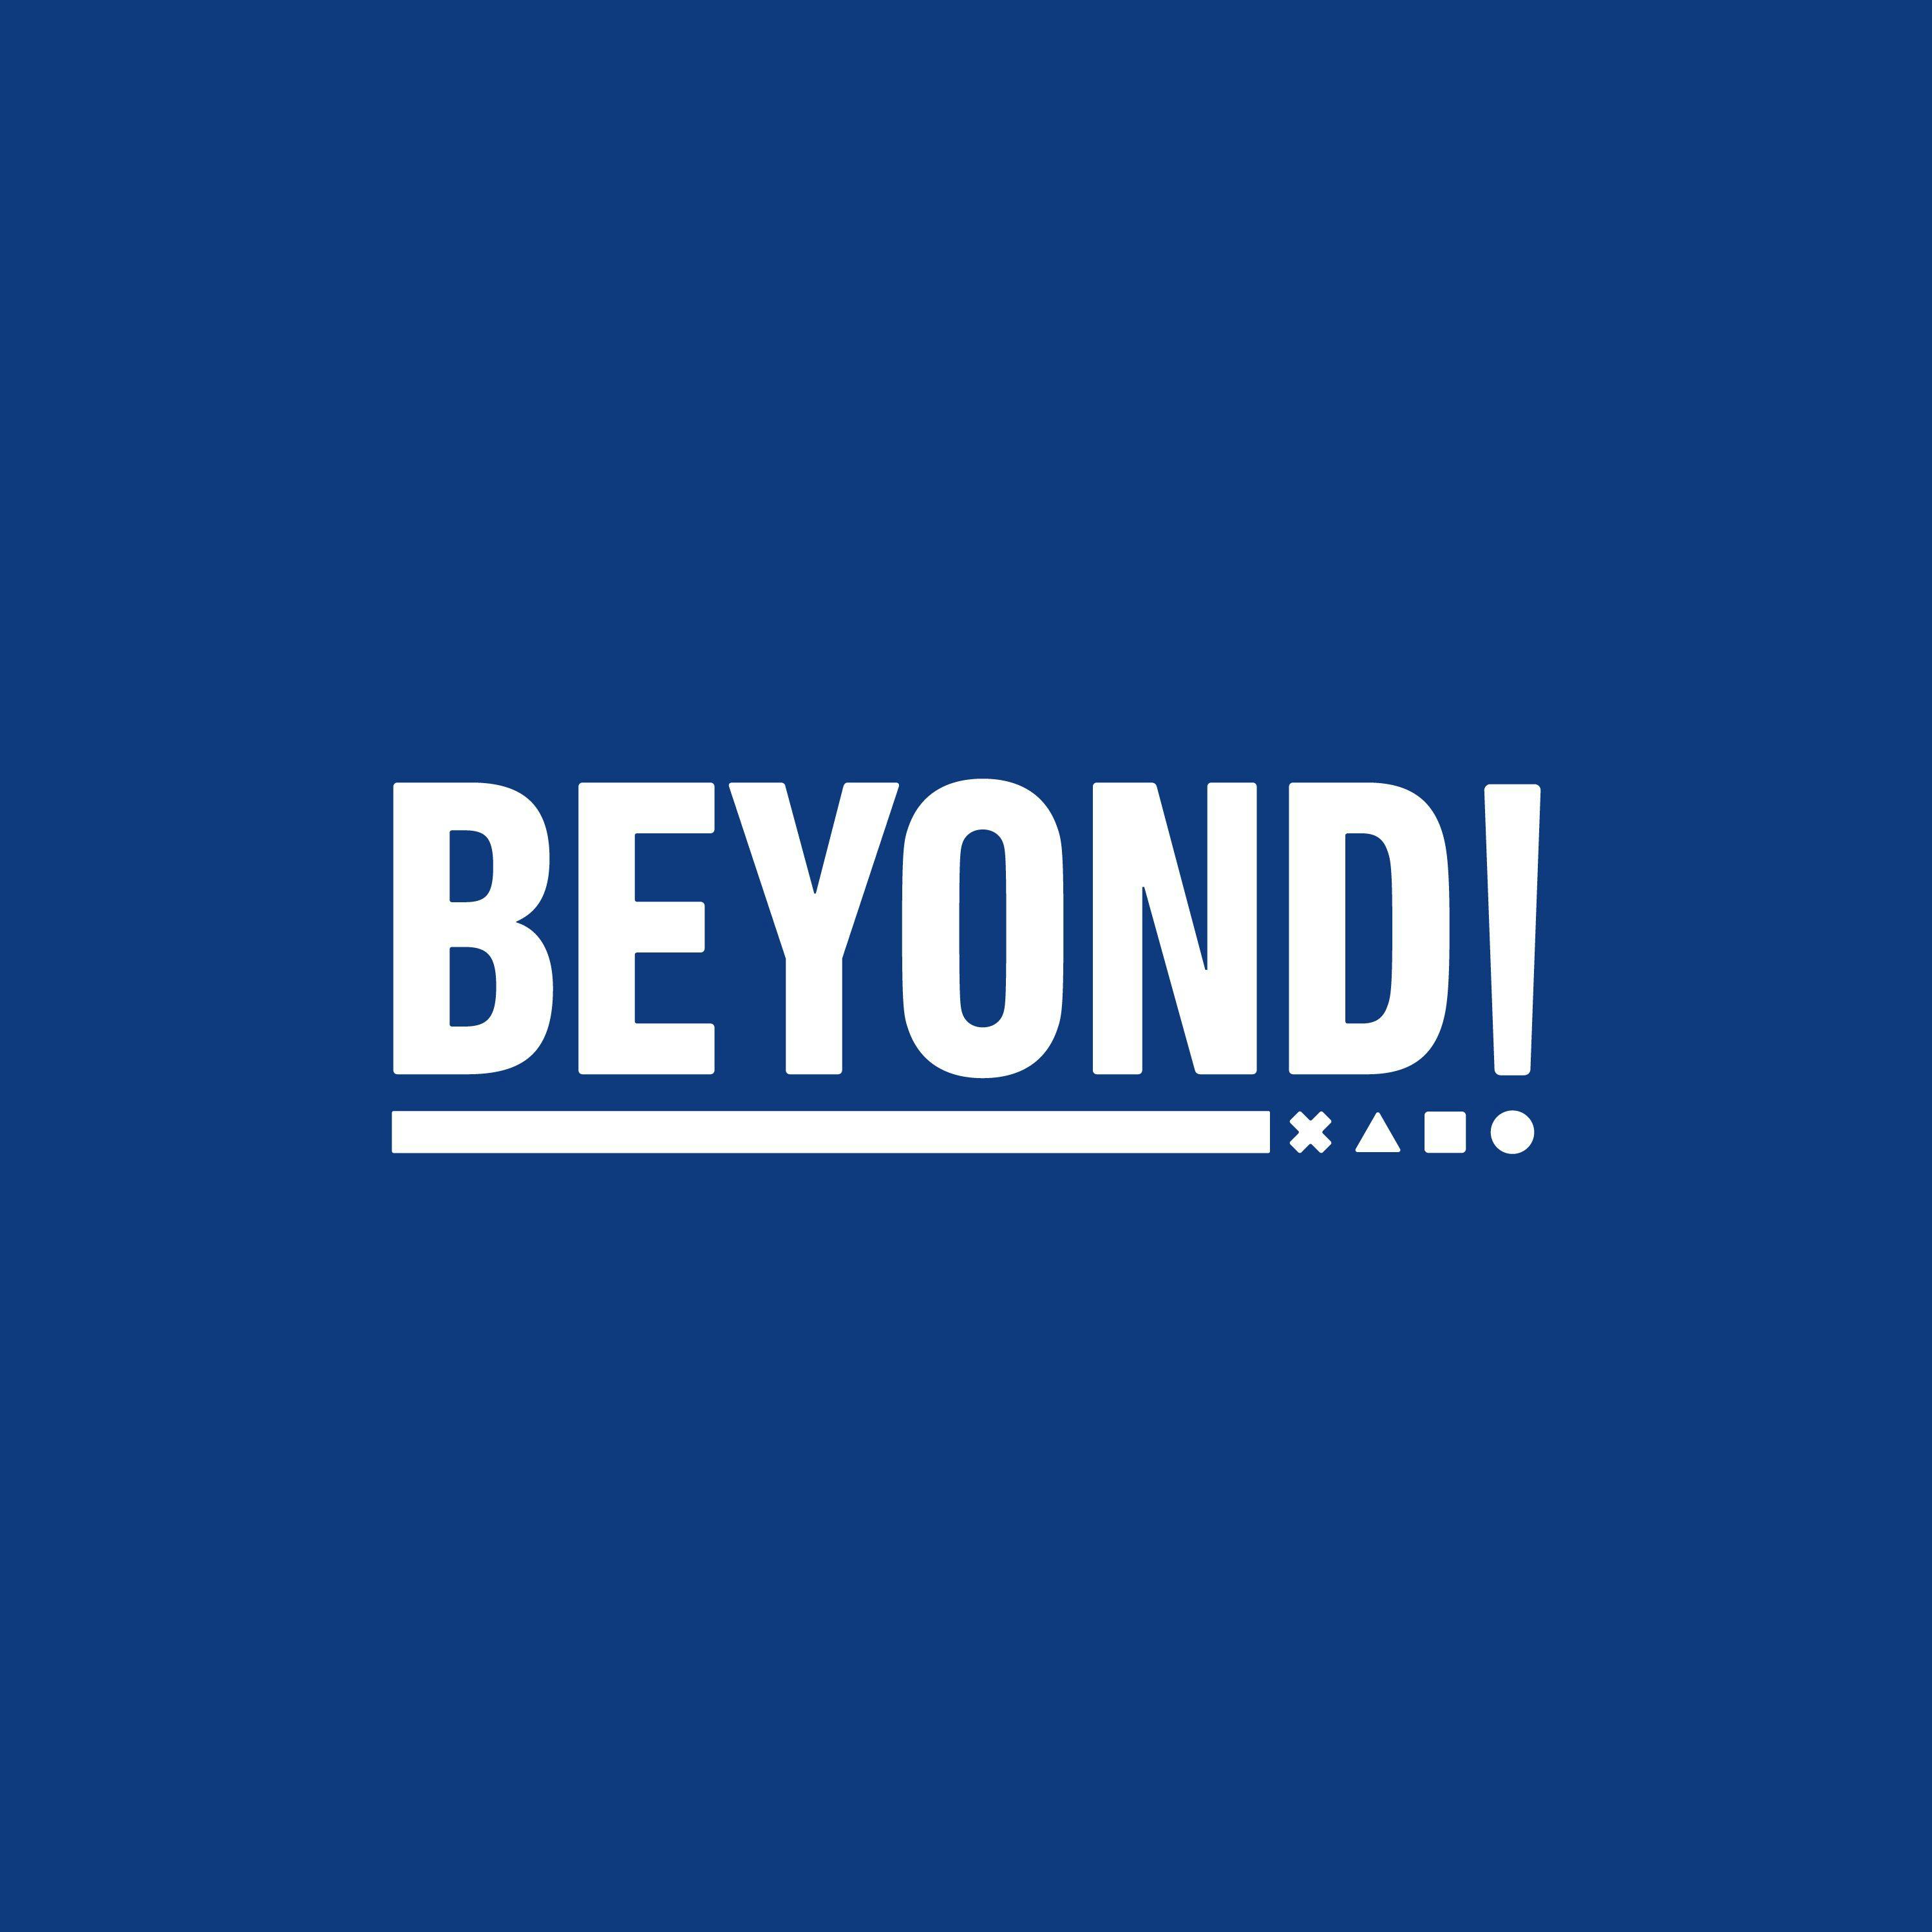 PS5: Analyzing Sony's Next-Gen Tech Reveal - Podcast Beyond Episode 635